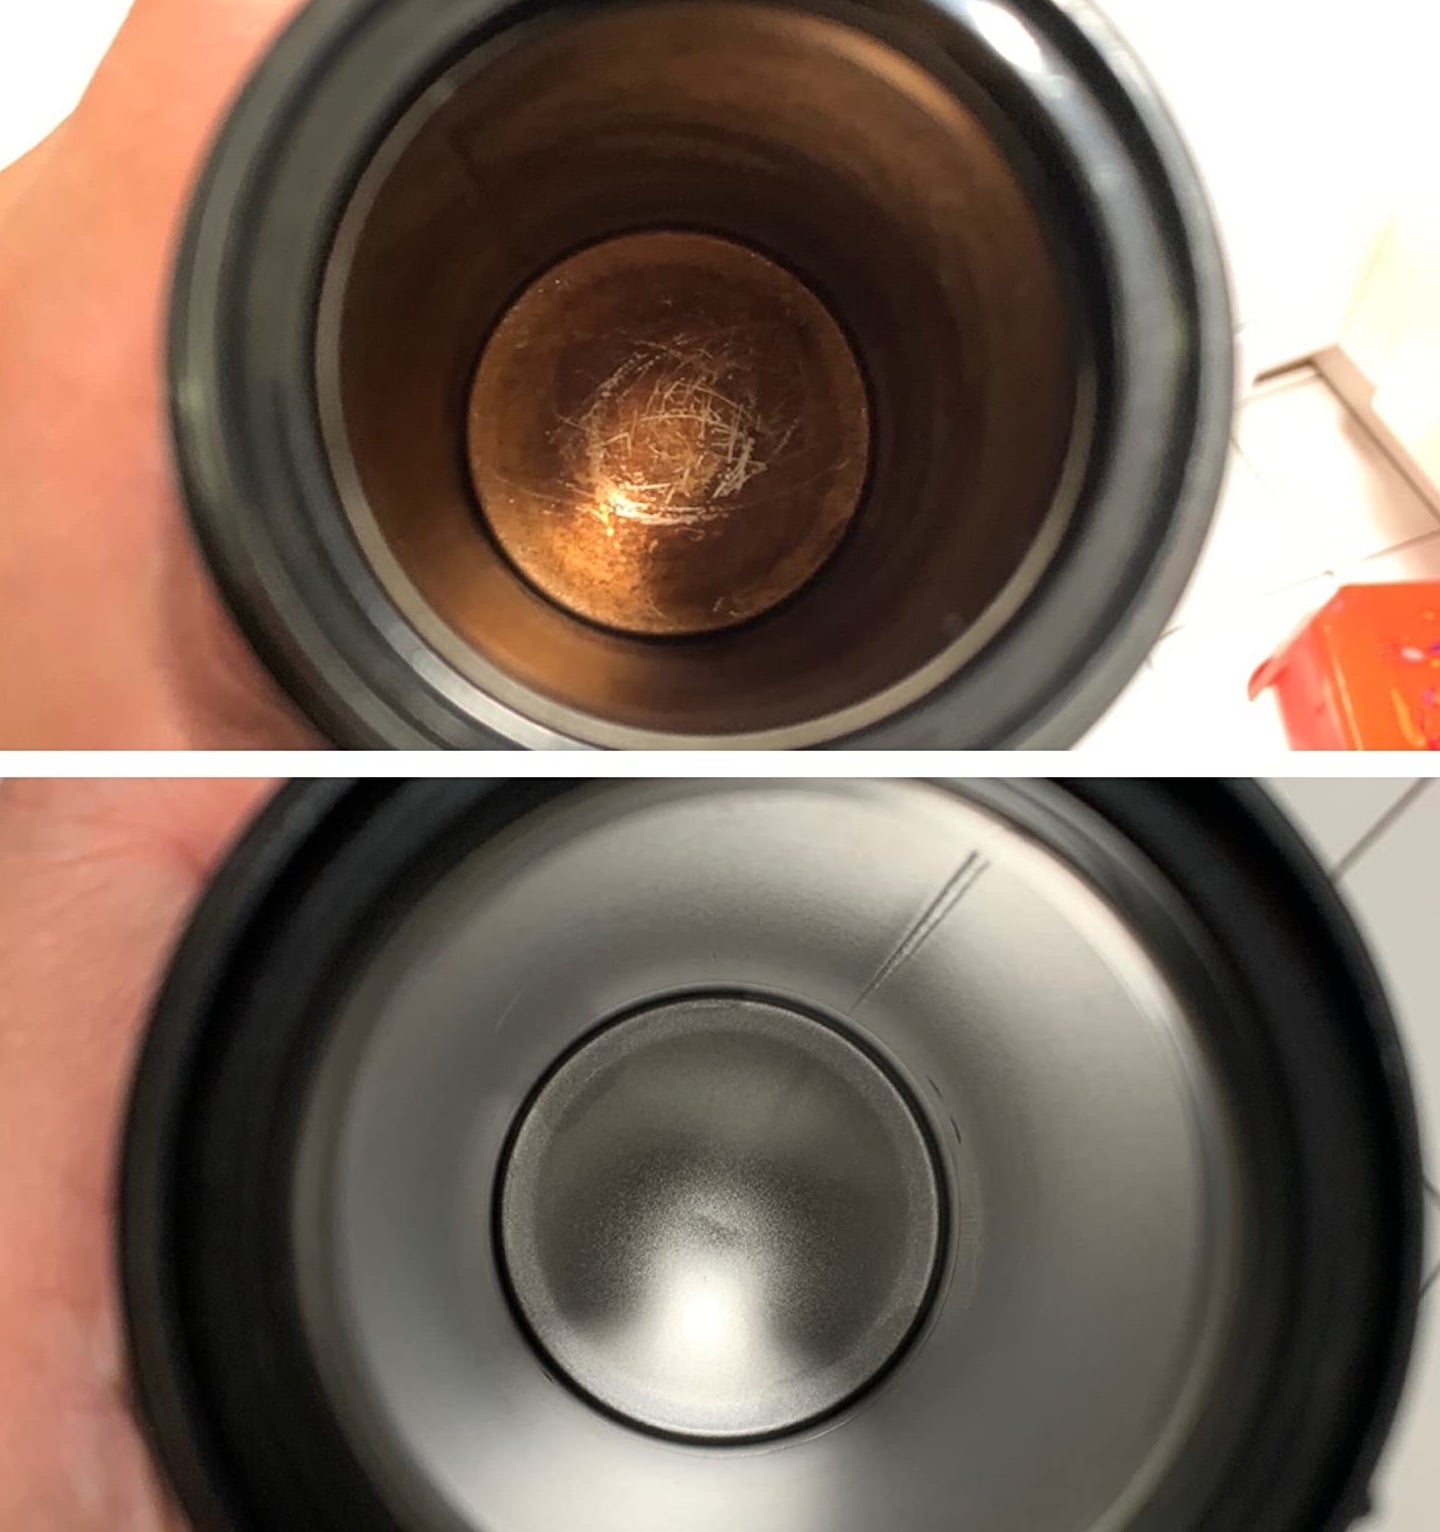 before and after photo of reviewer&#x27;s travel mug, showing it is completely cleaned and restored after using the tablets